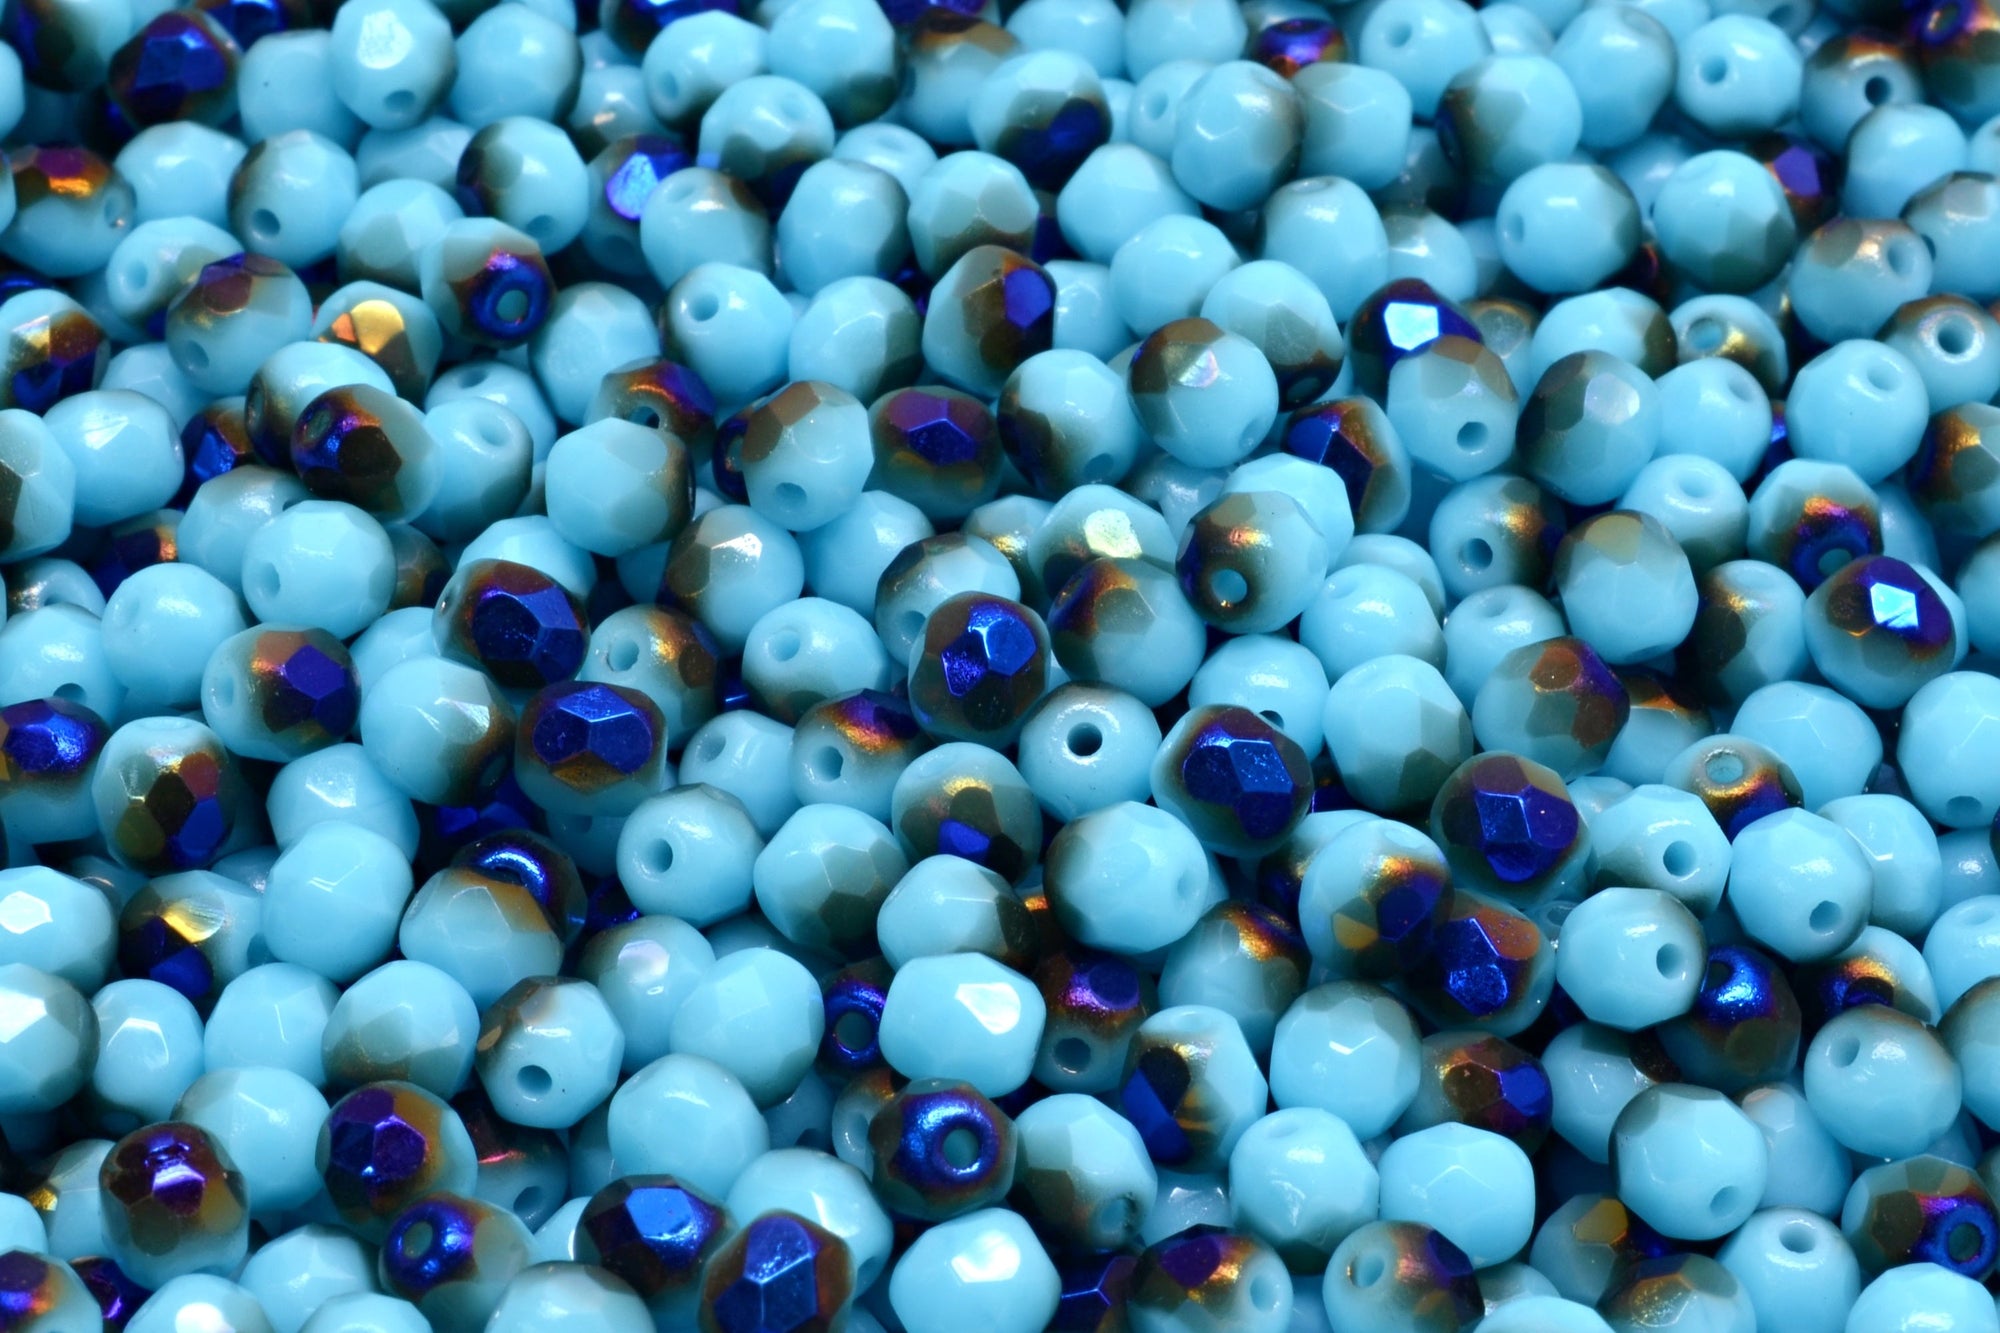 4mm Czech Fire Polish Beads, Turquoise Blue Azuro, 50 pieces